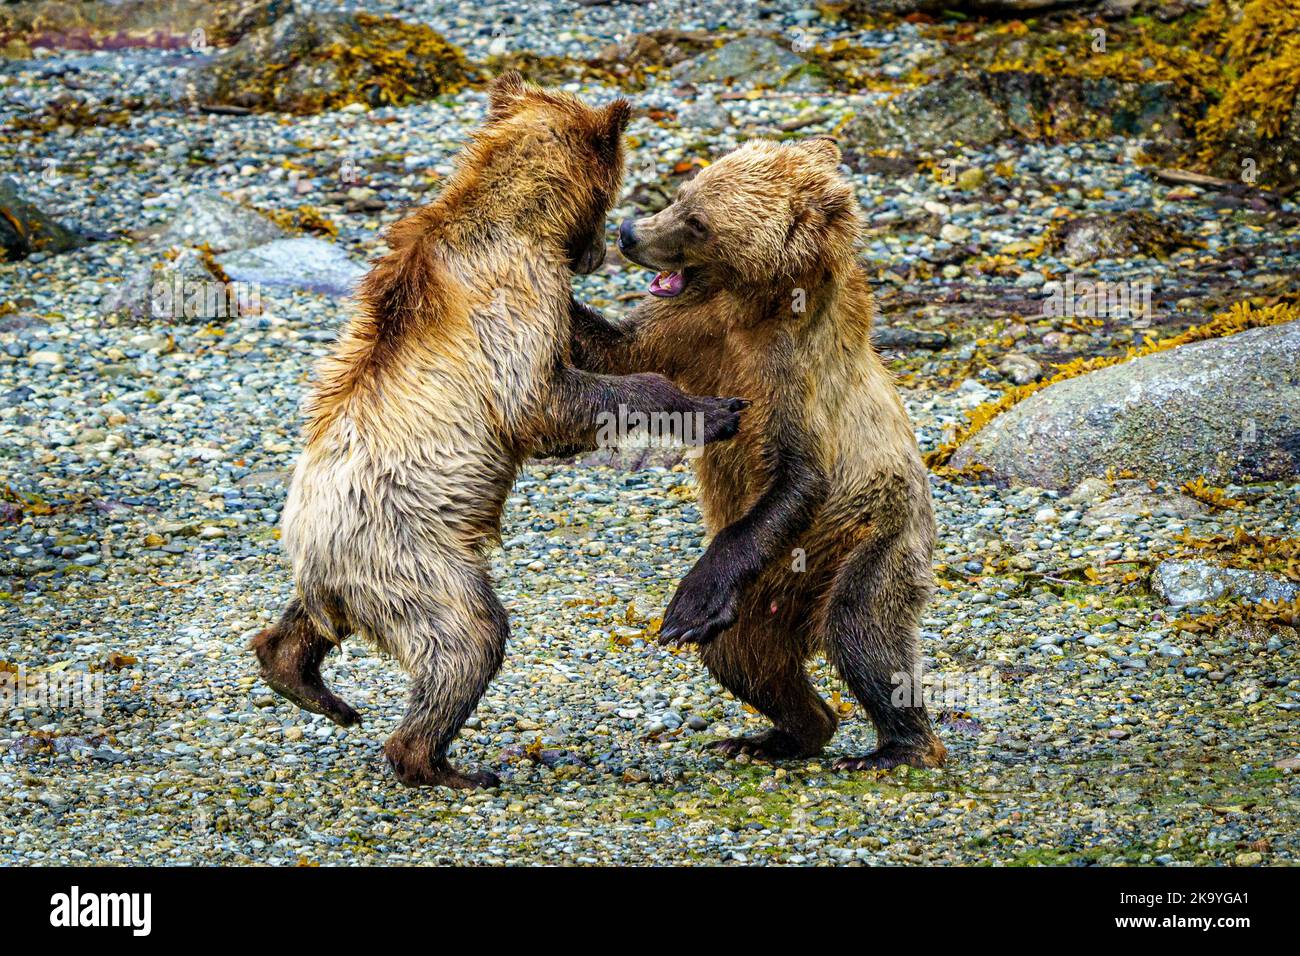 Grizzly bear cubs play fighting along the shore during low tide in Knight Inlet, First Nations Territory, British Columbia, Canada Stock Photo